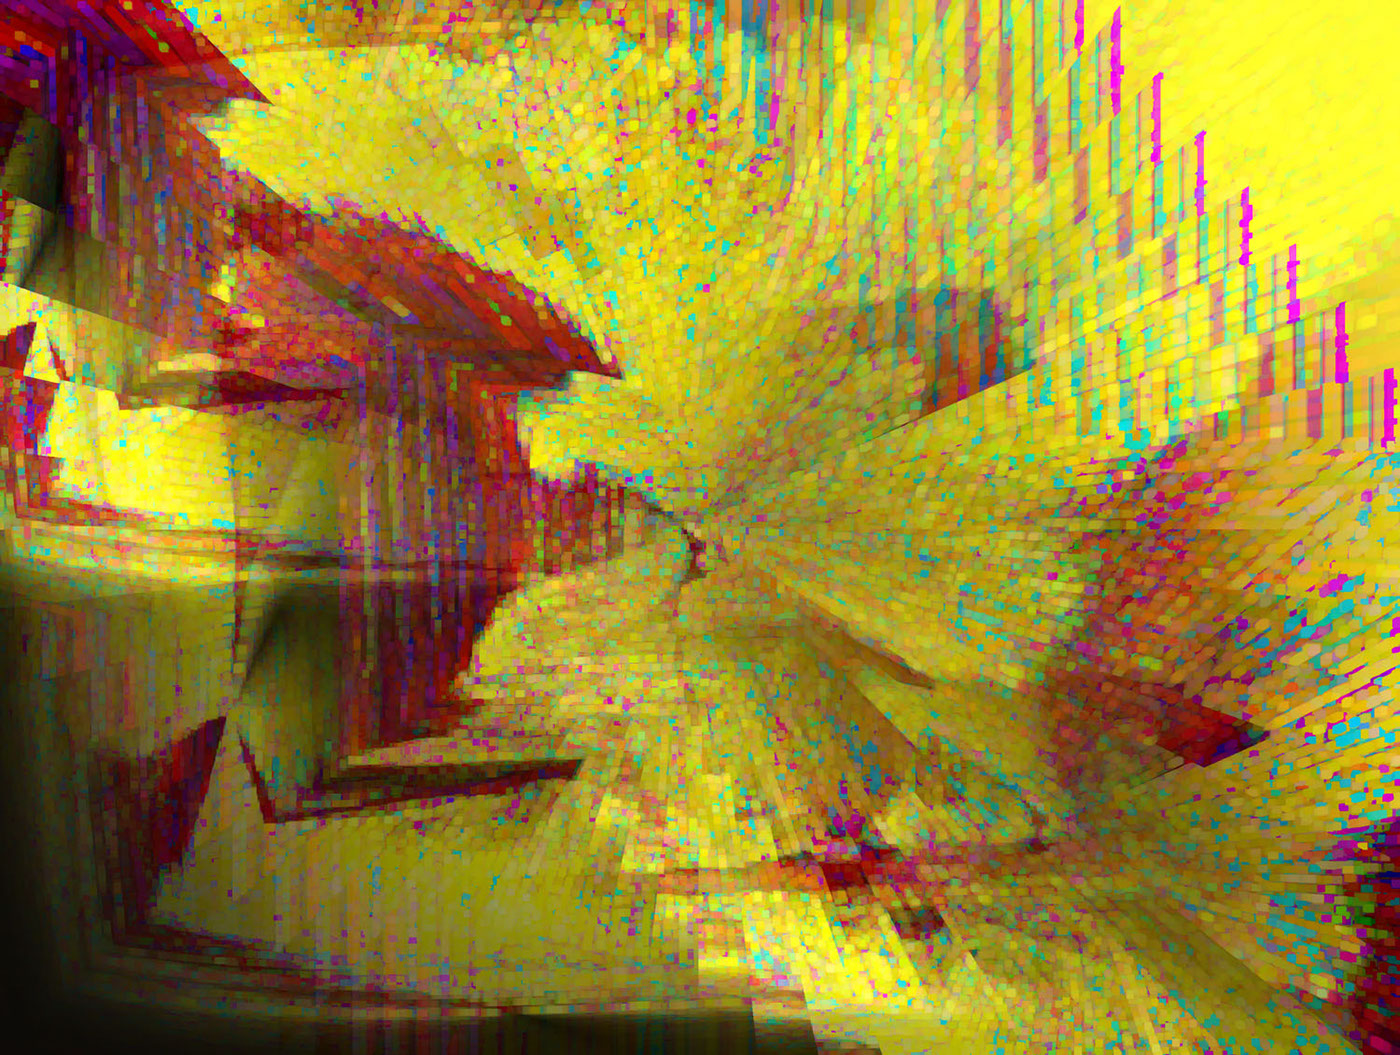 Glitch noise linux Digital Filter data recovery found imaging sought imaging Post Production Digital Art  Pixel art